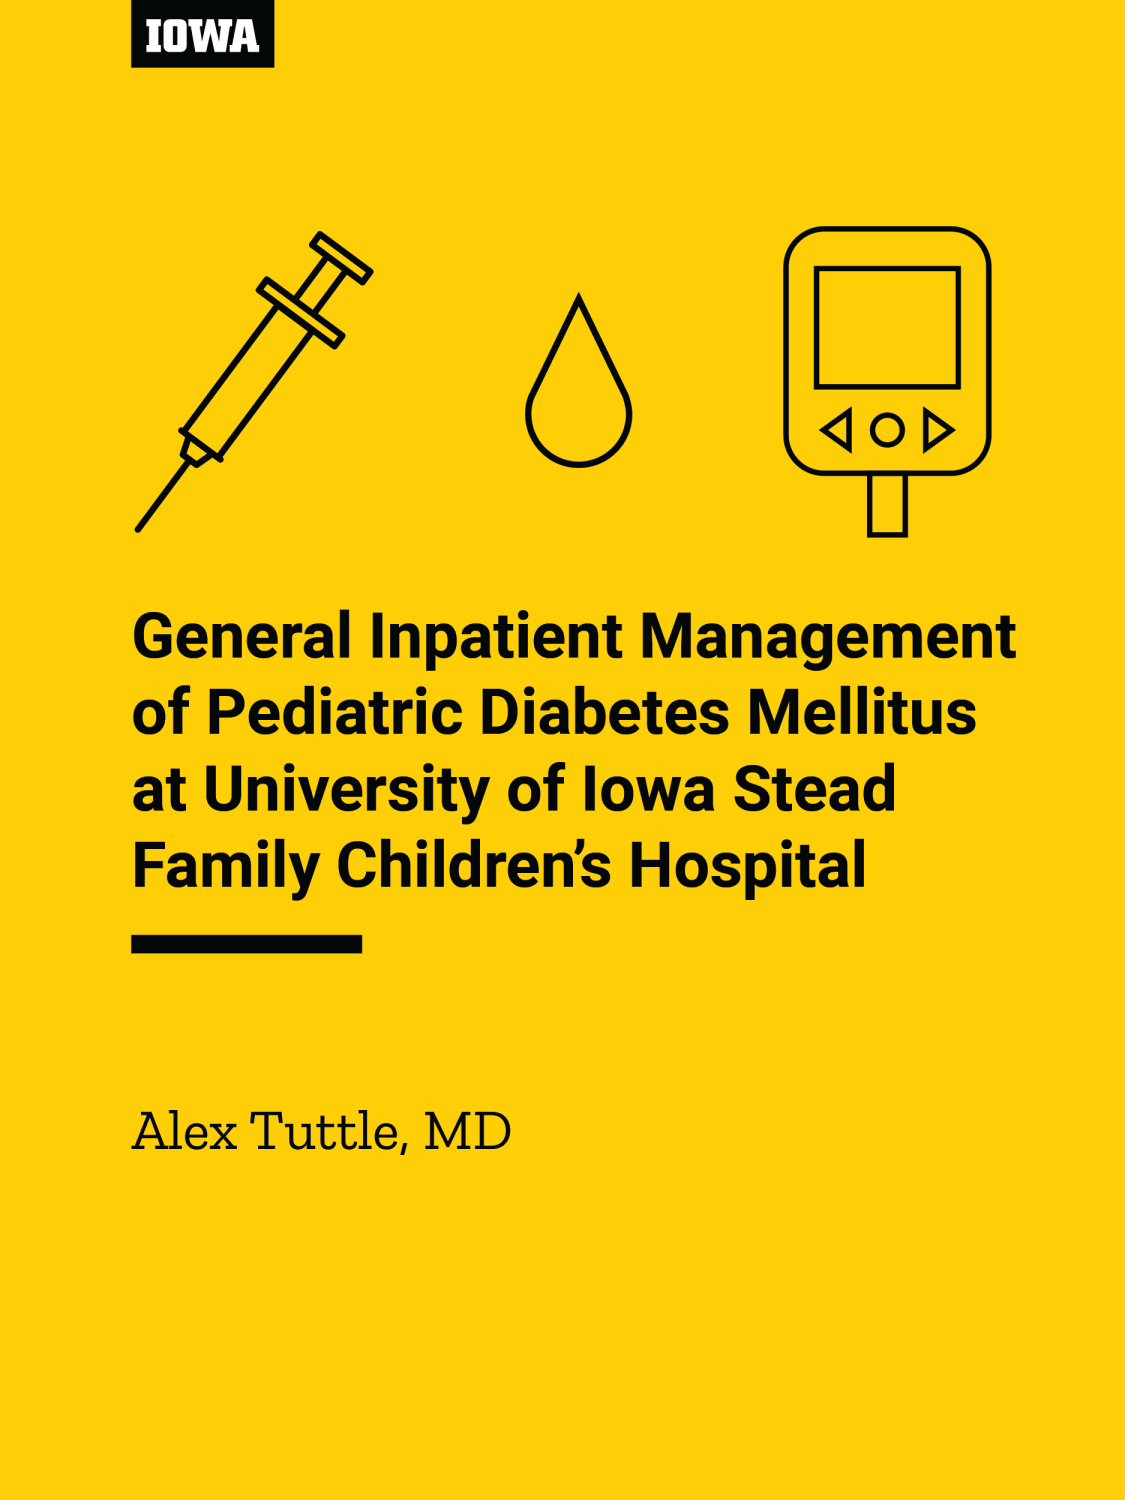 Cover image for General Inpatient Management of Pediatric Diabetes Mellitus at University of Iowa Stead Family Children's Hospital